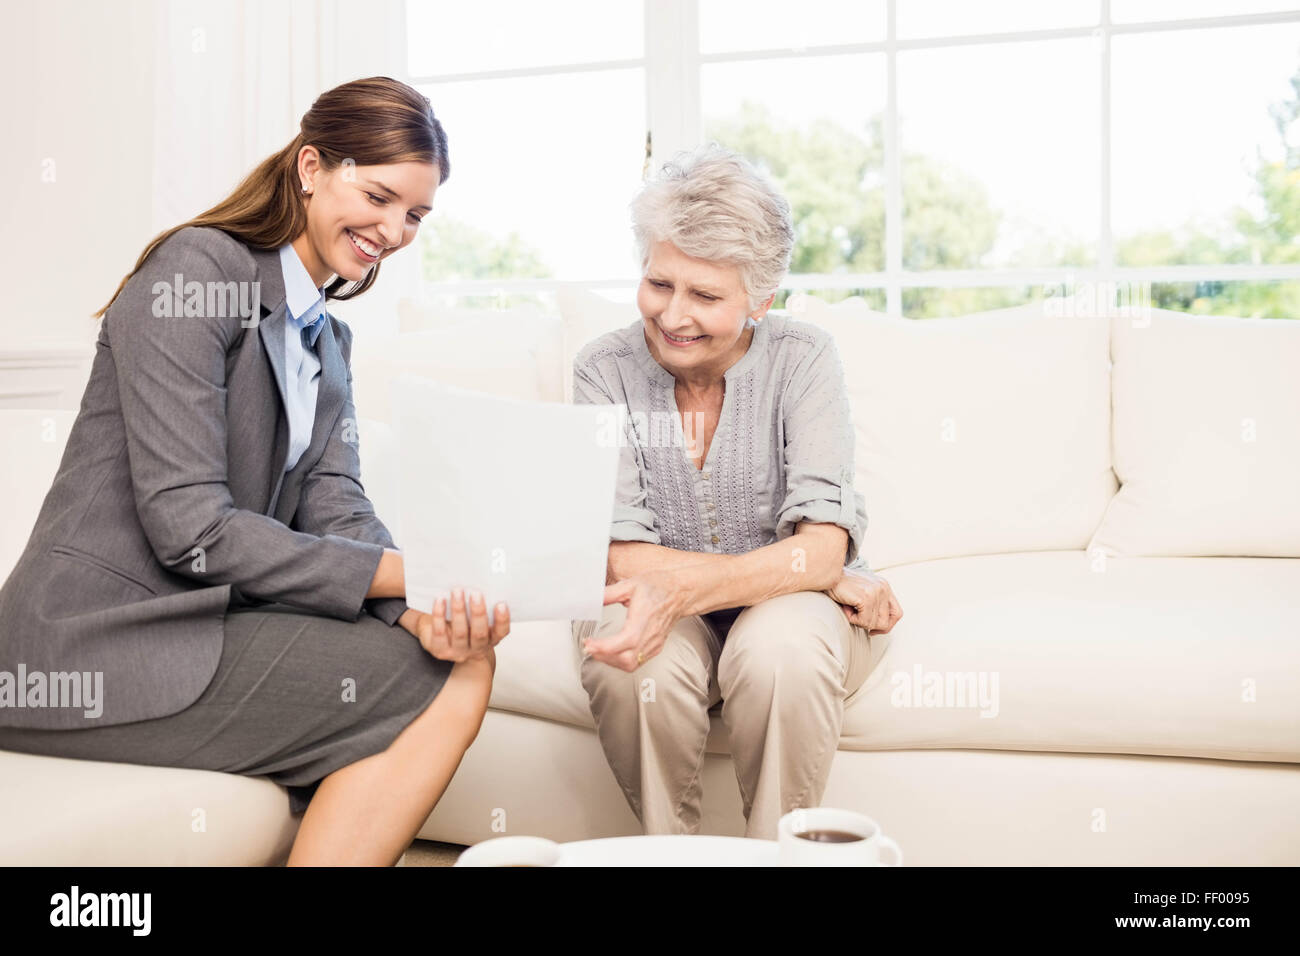 Smiling businesswoman showing documents to senior woman Stock Photo